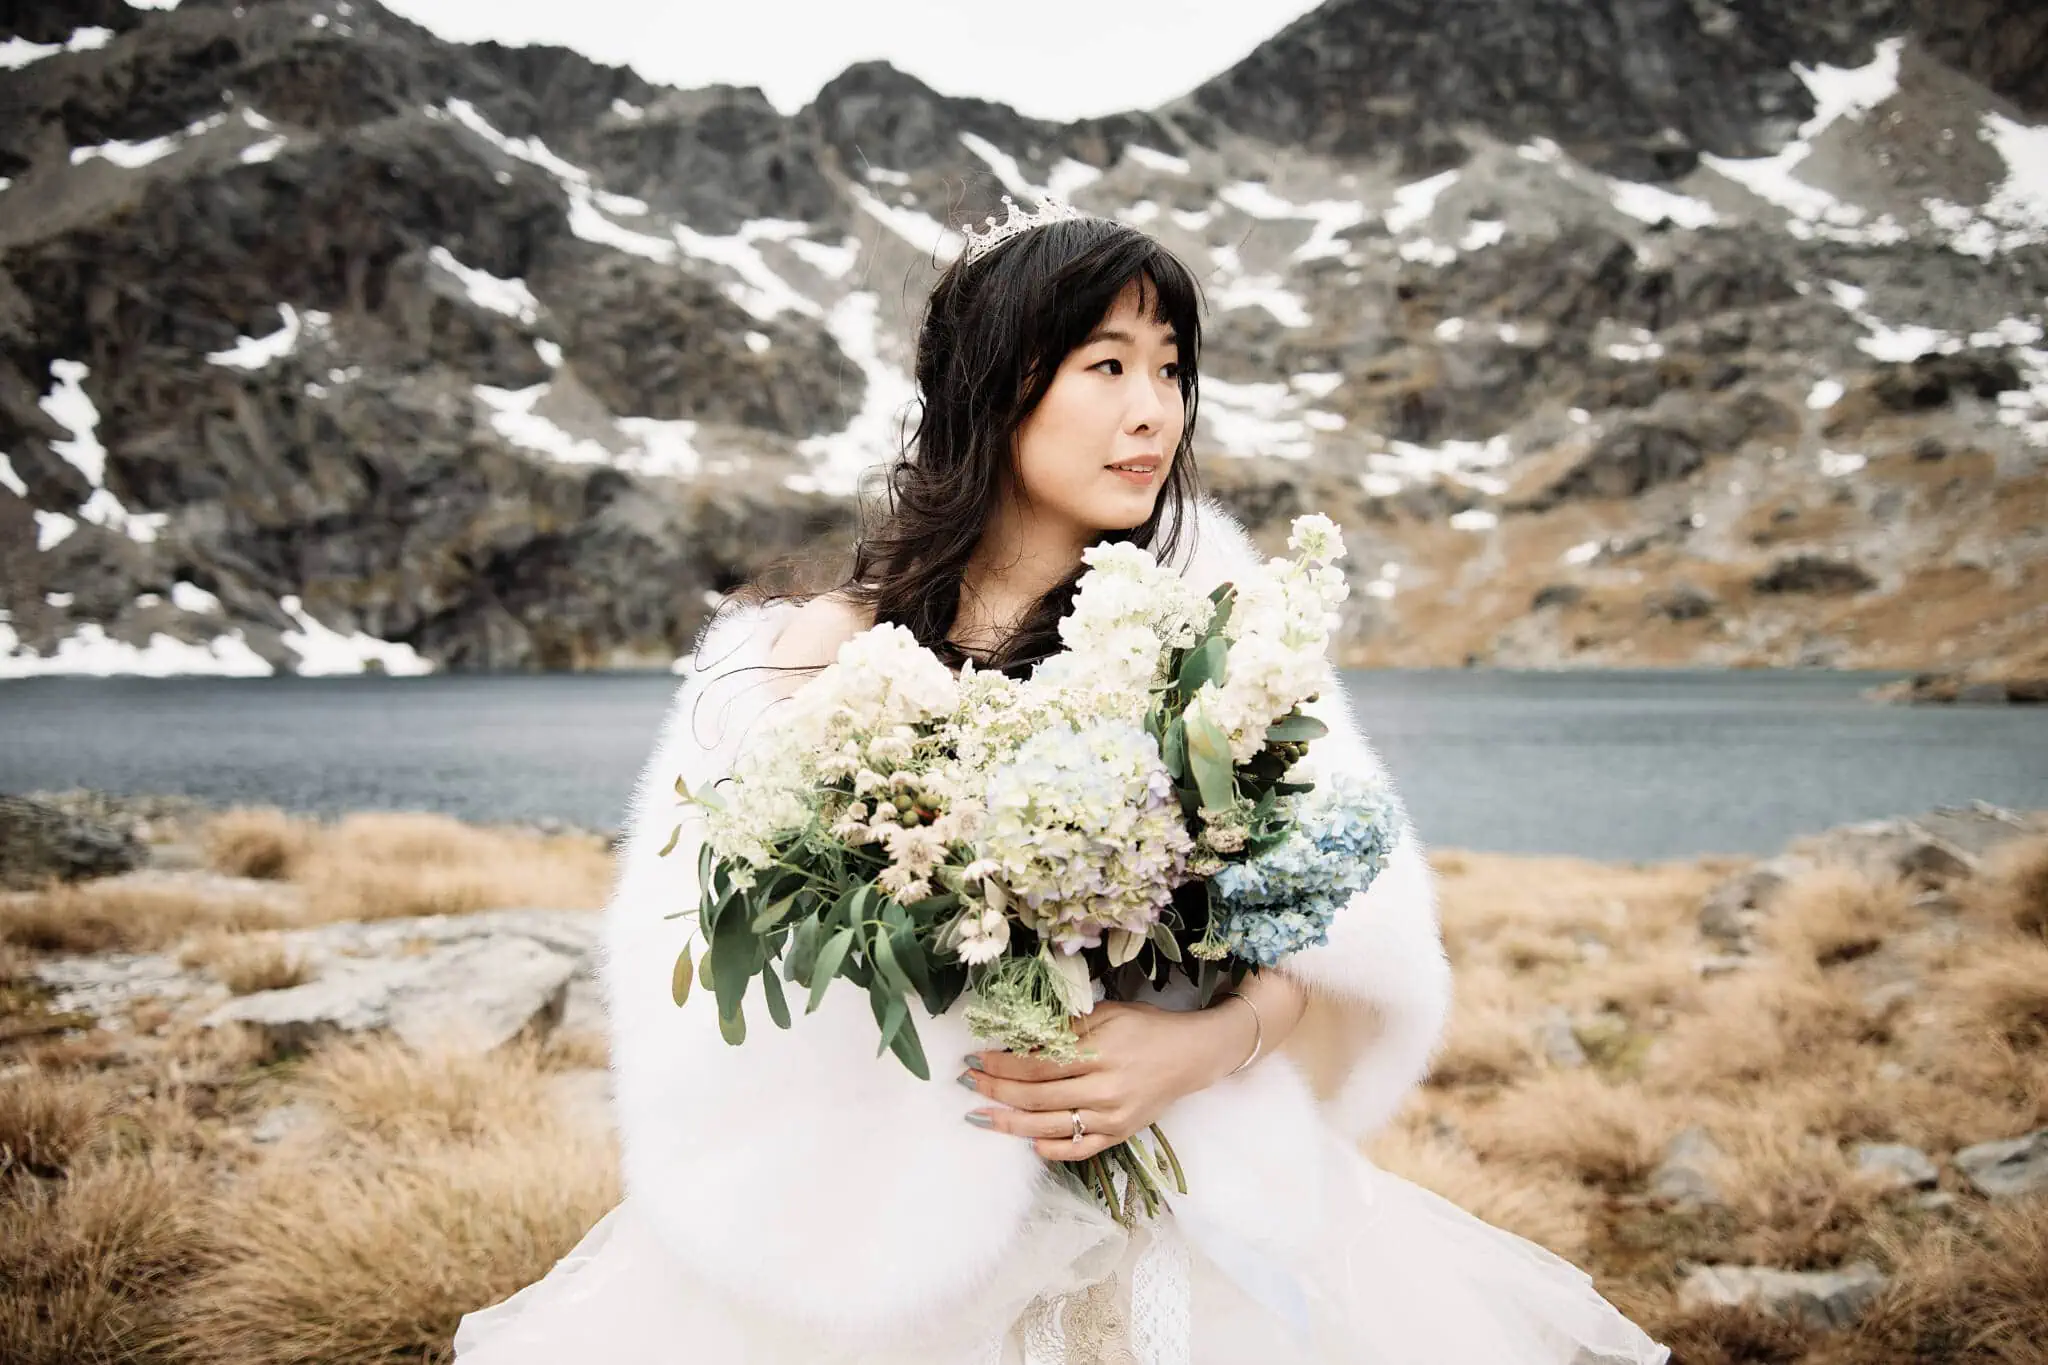 Carlos and Wanzhu's intimate heli elopement wedding with a bride holding a bouquet in front of Cecil Peak mountains.